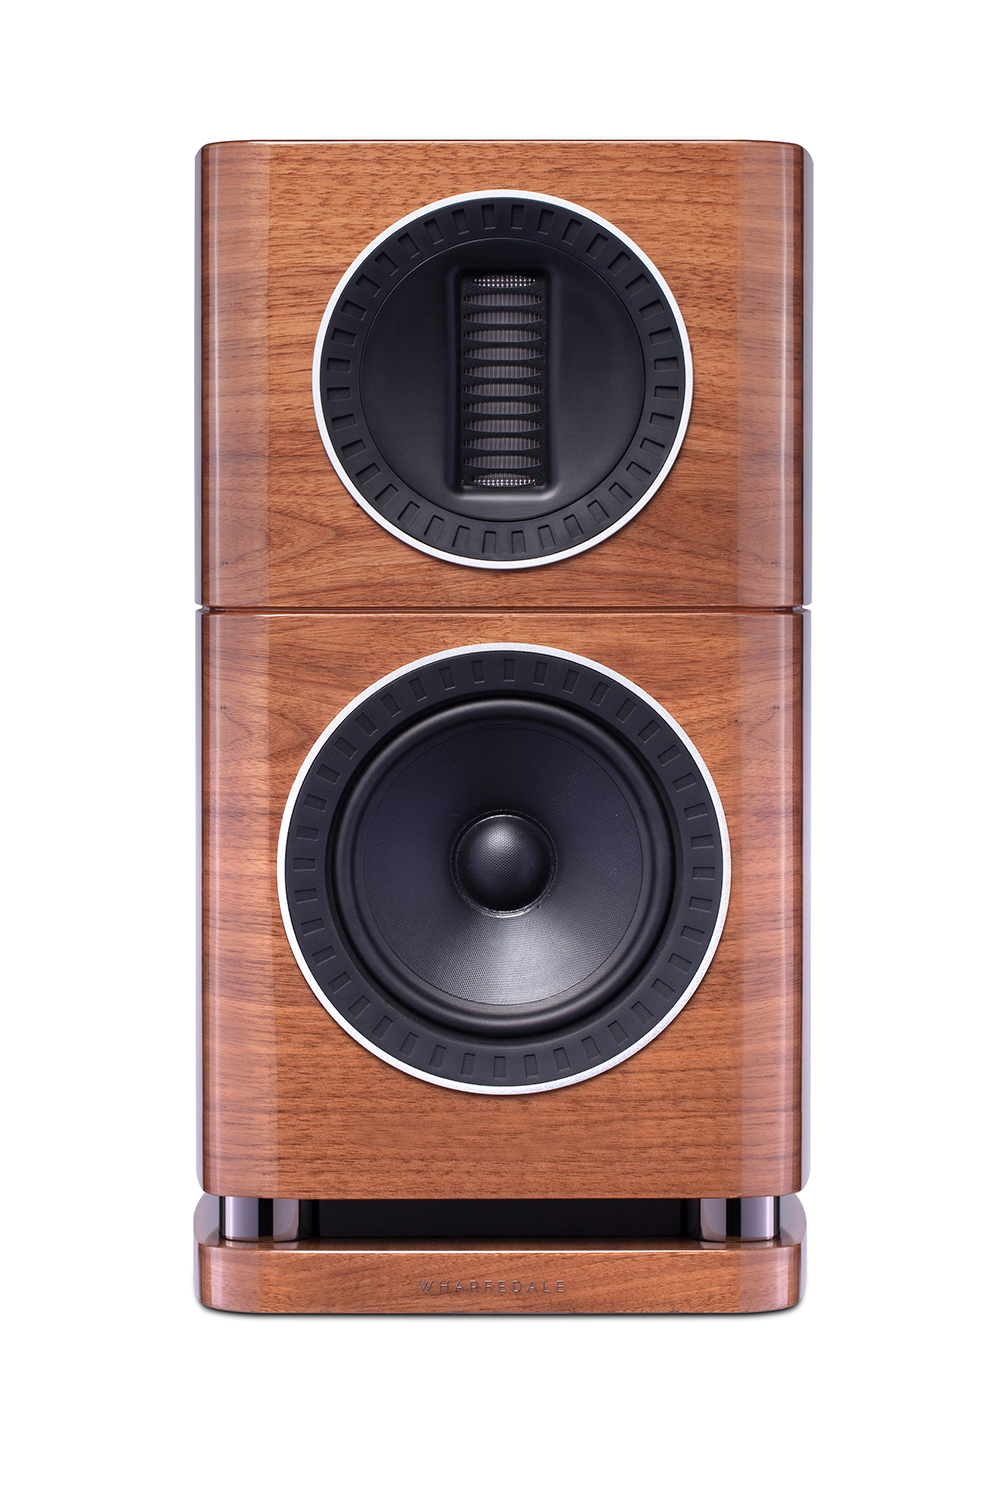 ELYSIAN 1 is the latest addition to the ﬂagship loudspeaker series from Wharfedale, pushing the boundaries of capability and performance. A genuine example of luxury audio, ELYSIAN 1 oﬀers indulgence in design, materials aesthetic, and performance, now in a more compact standmount format. 